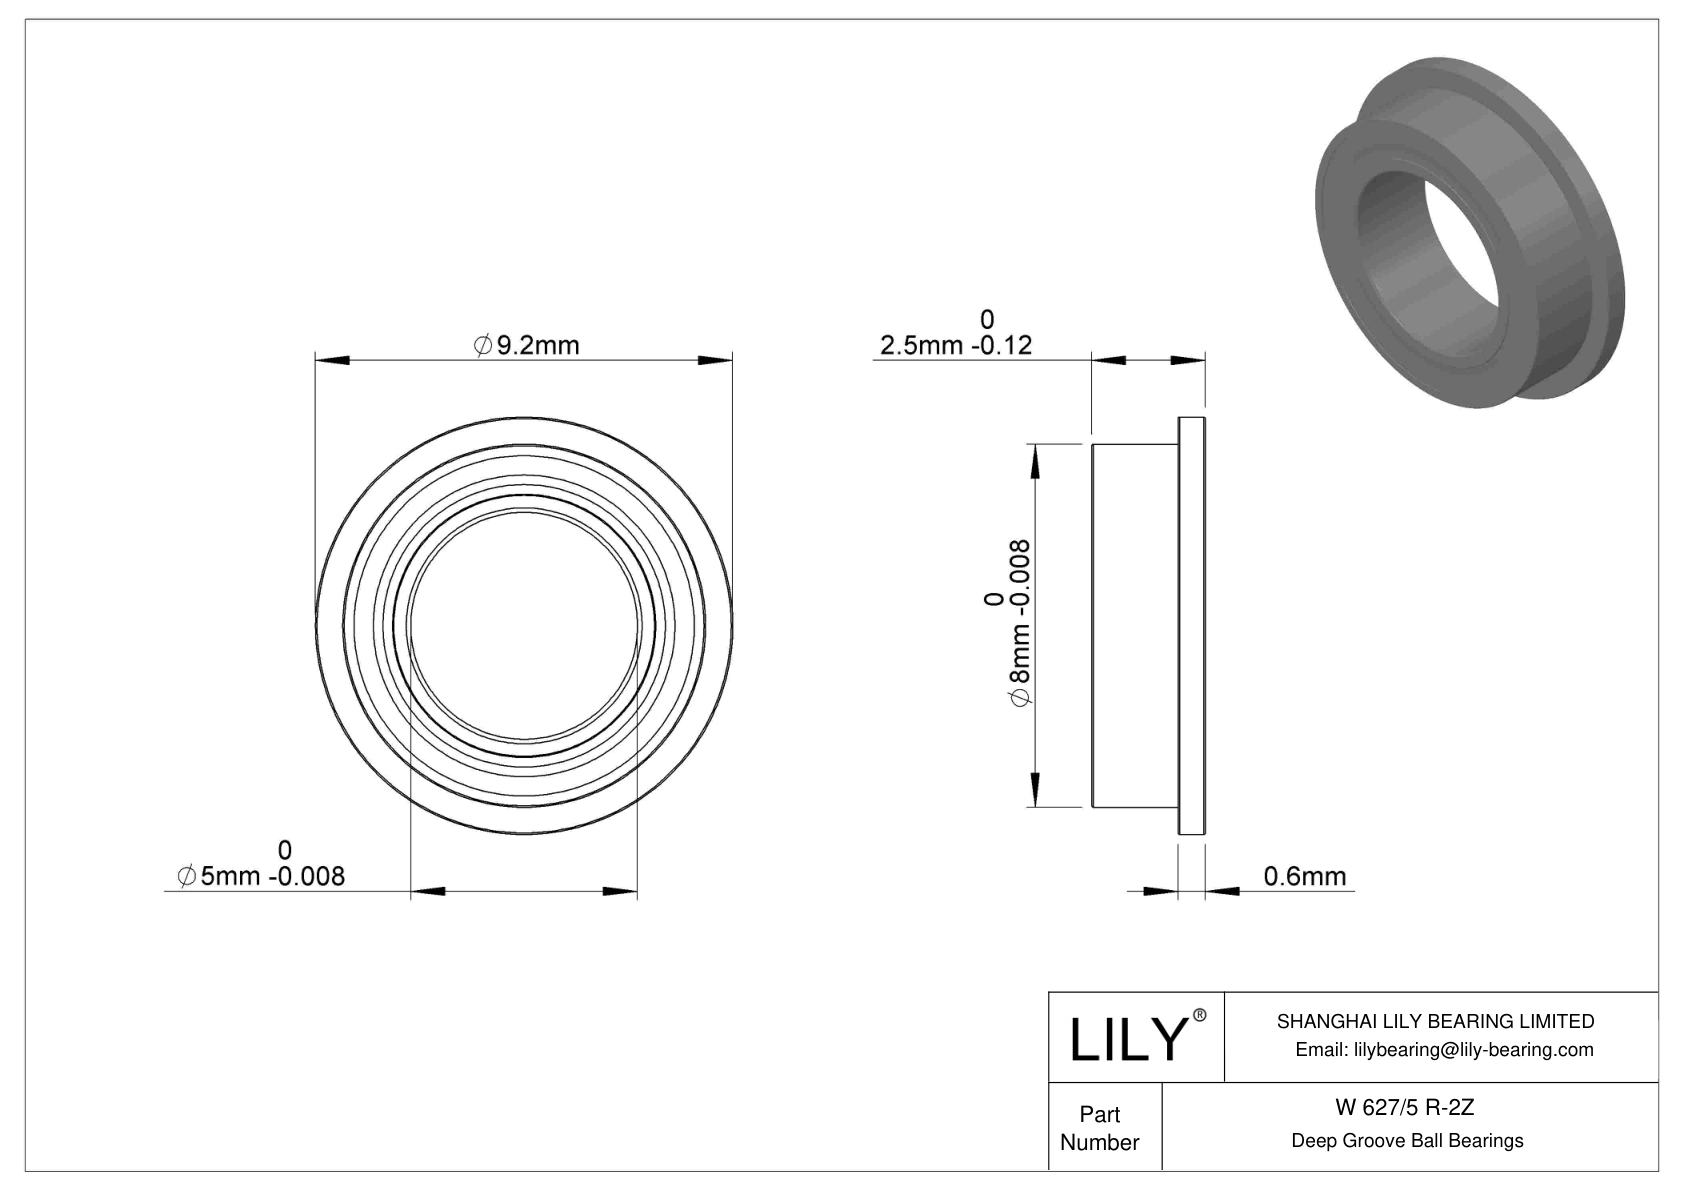 W 627/5 R-2Z Flanged Ball Bearings cad drawing